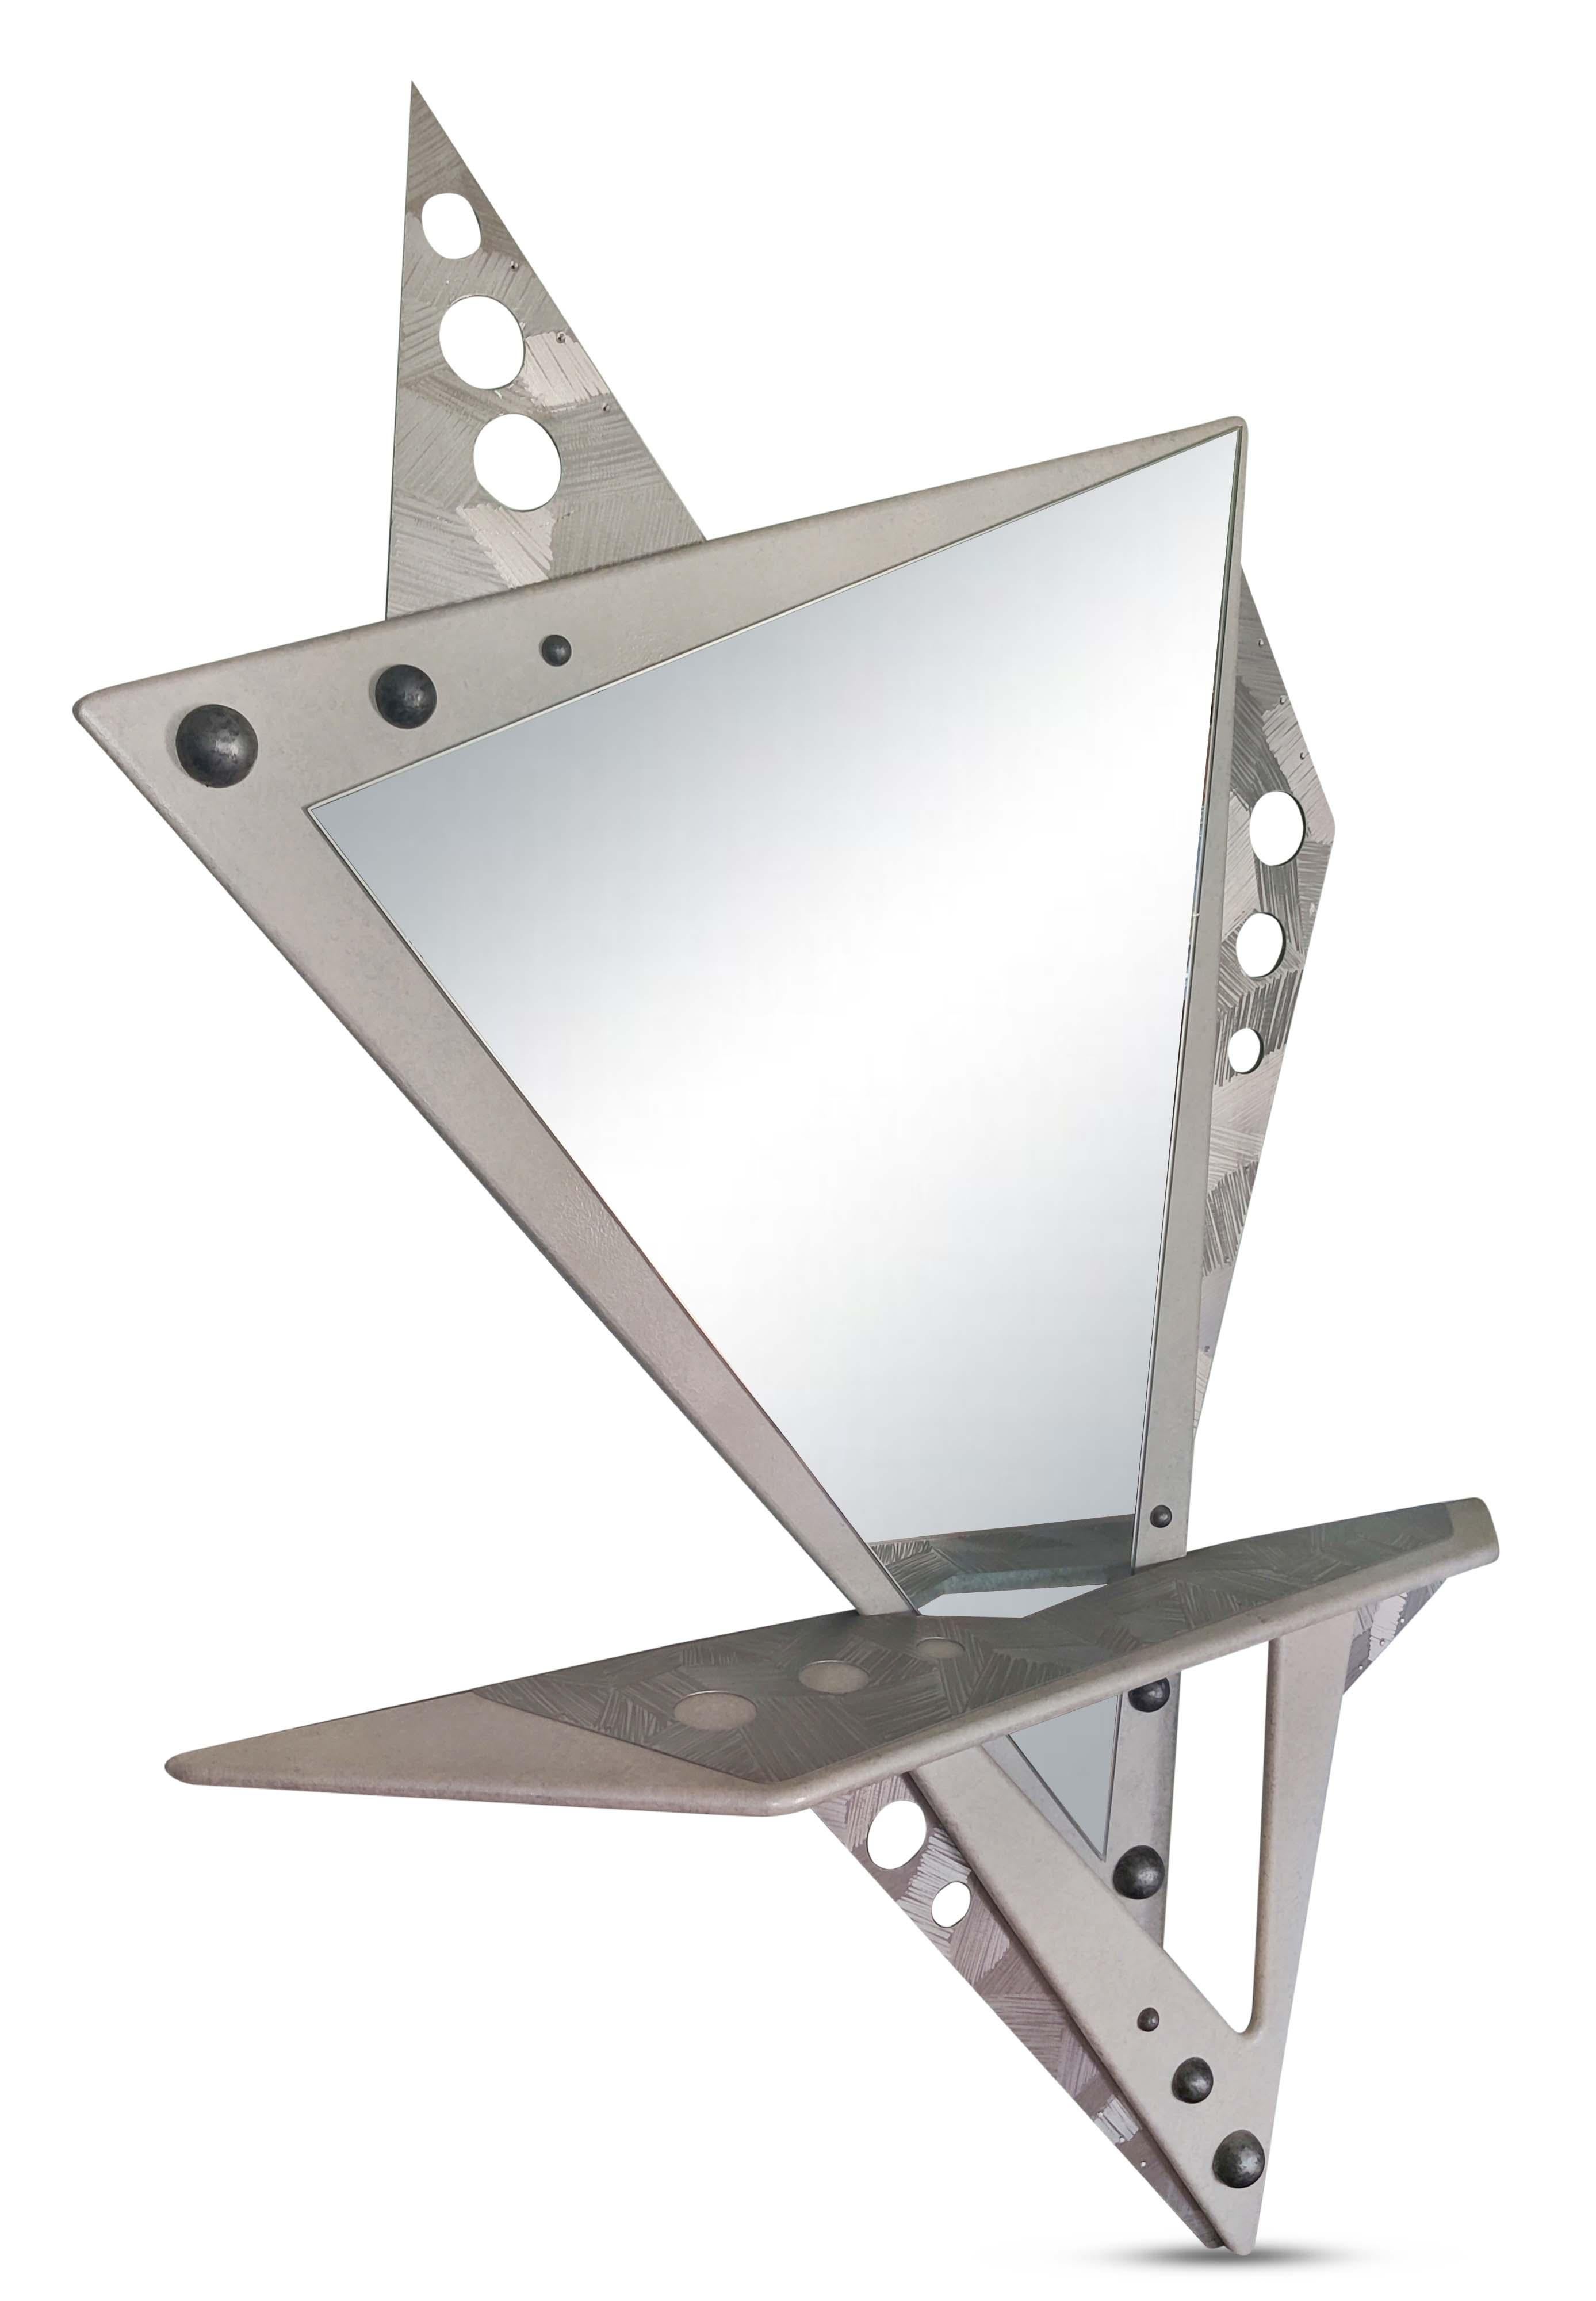 Space Age Buck Rogers Inspired Wall Mirror & Overlapping Console Table 1980s Memphis Style For Sale